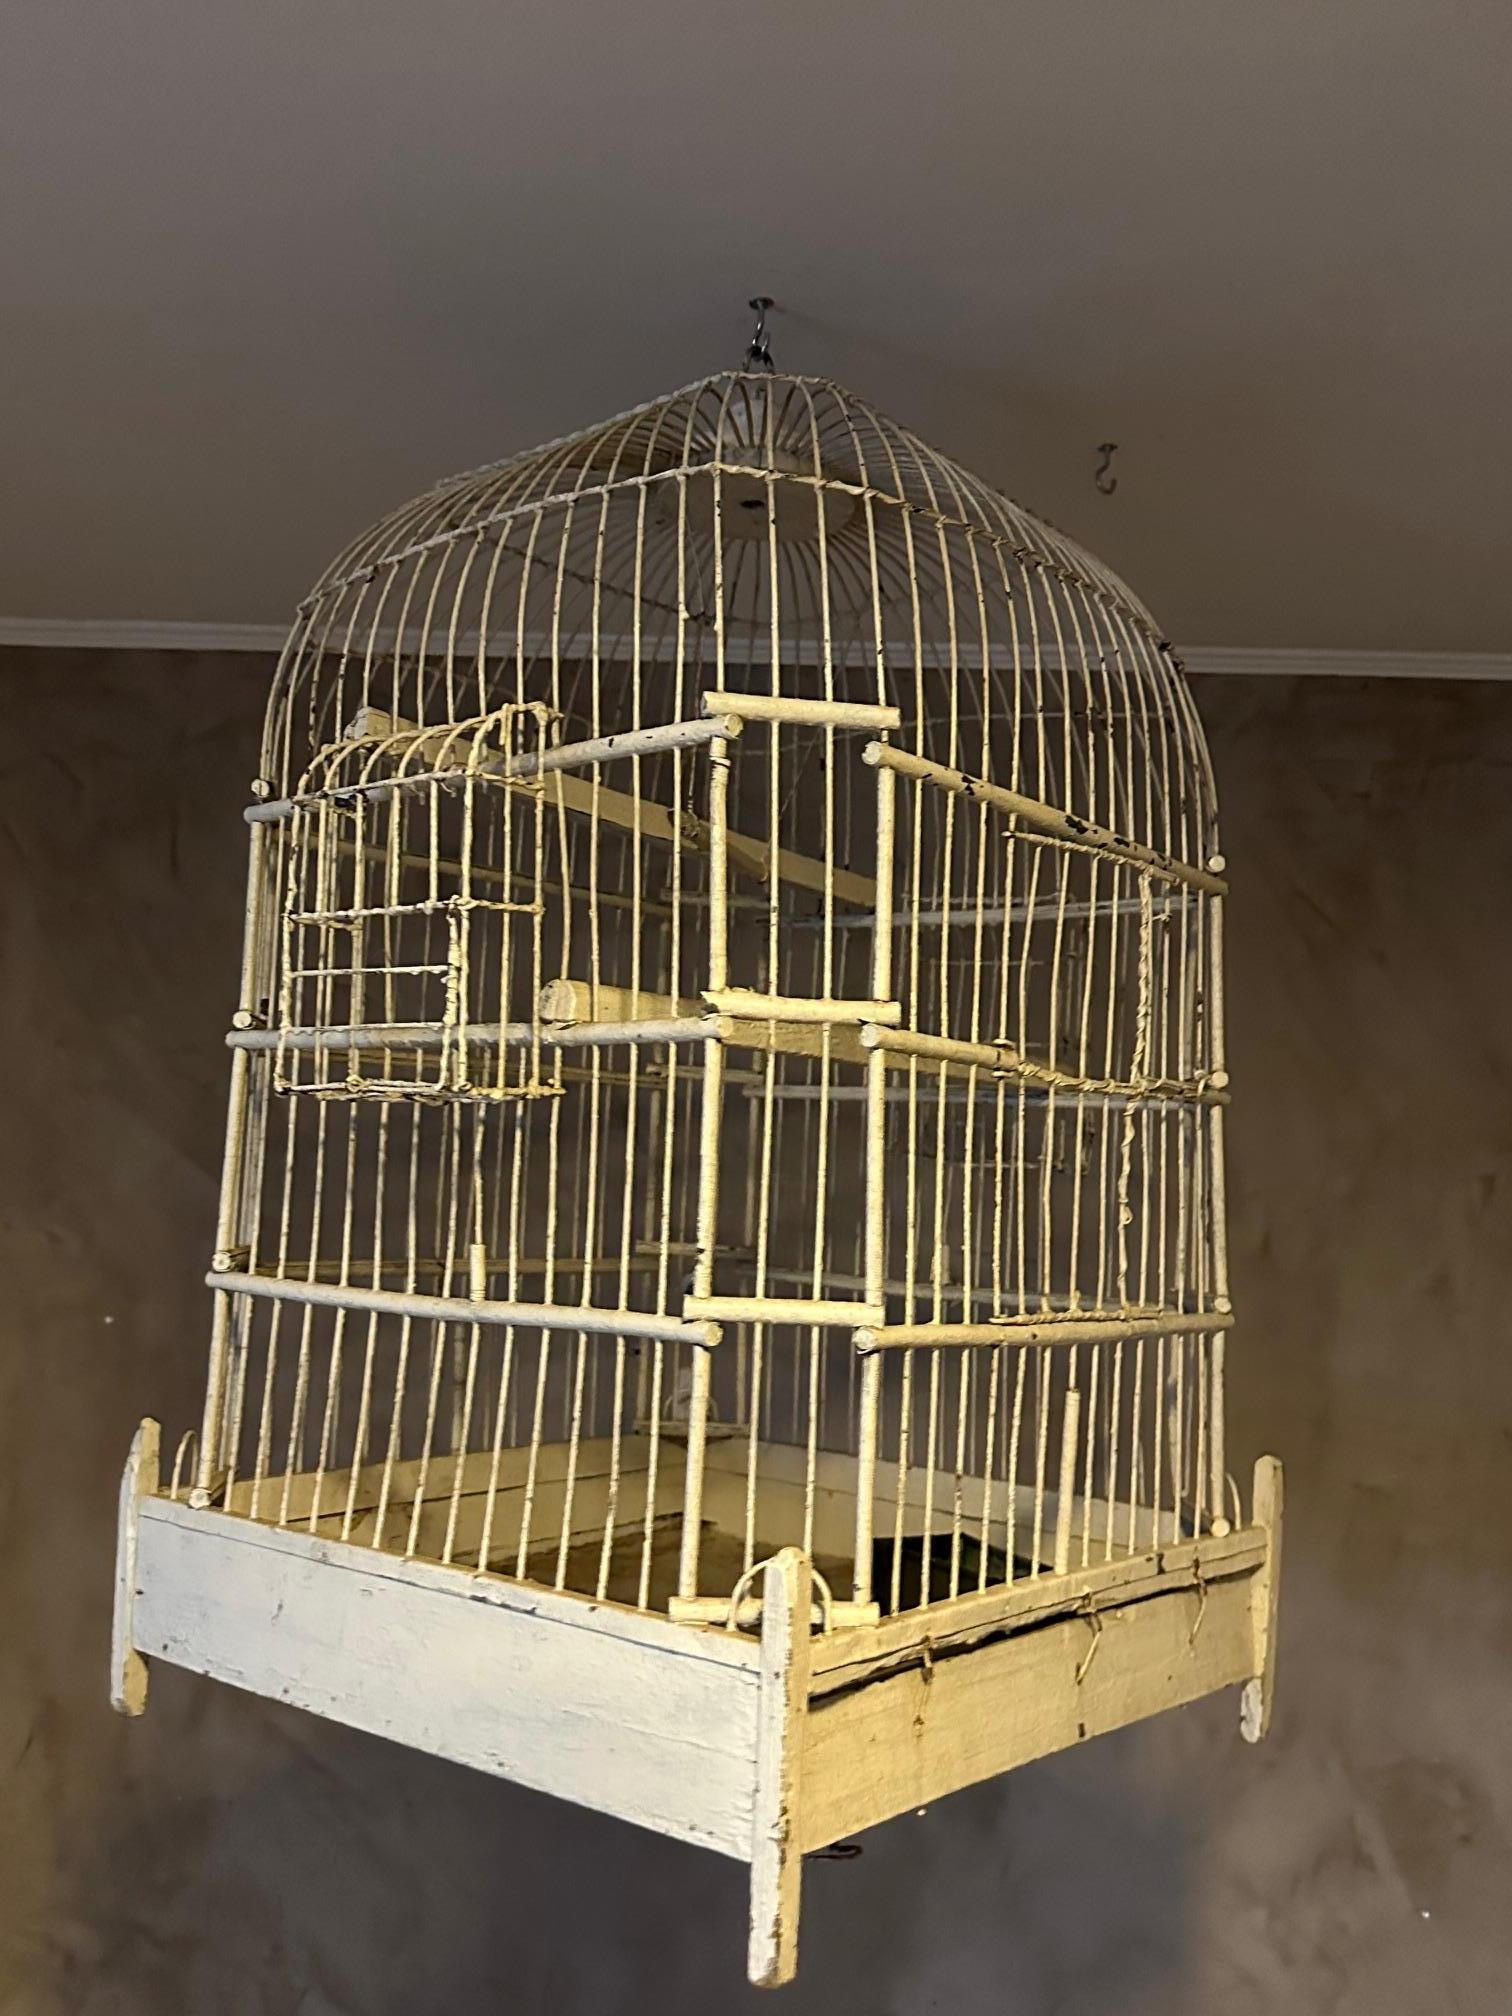 20th century French Painted Metal and Wood Bird Cage, 1920s For Sale 7